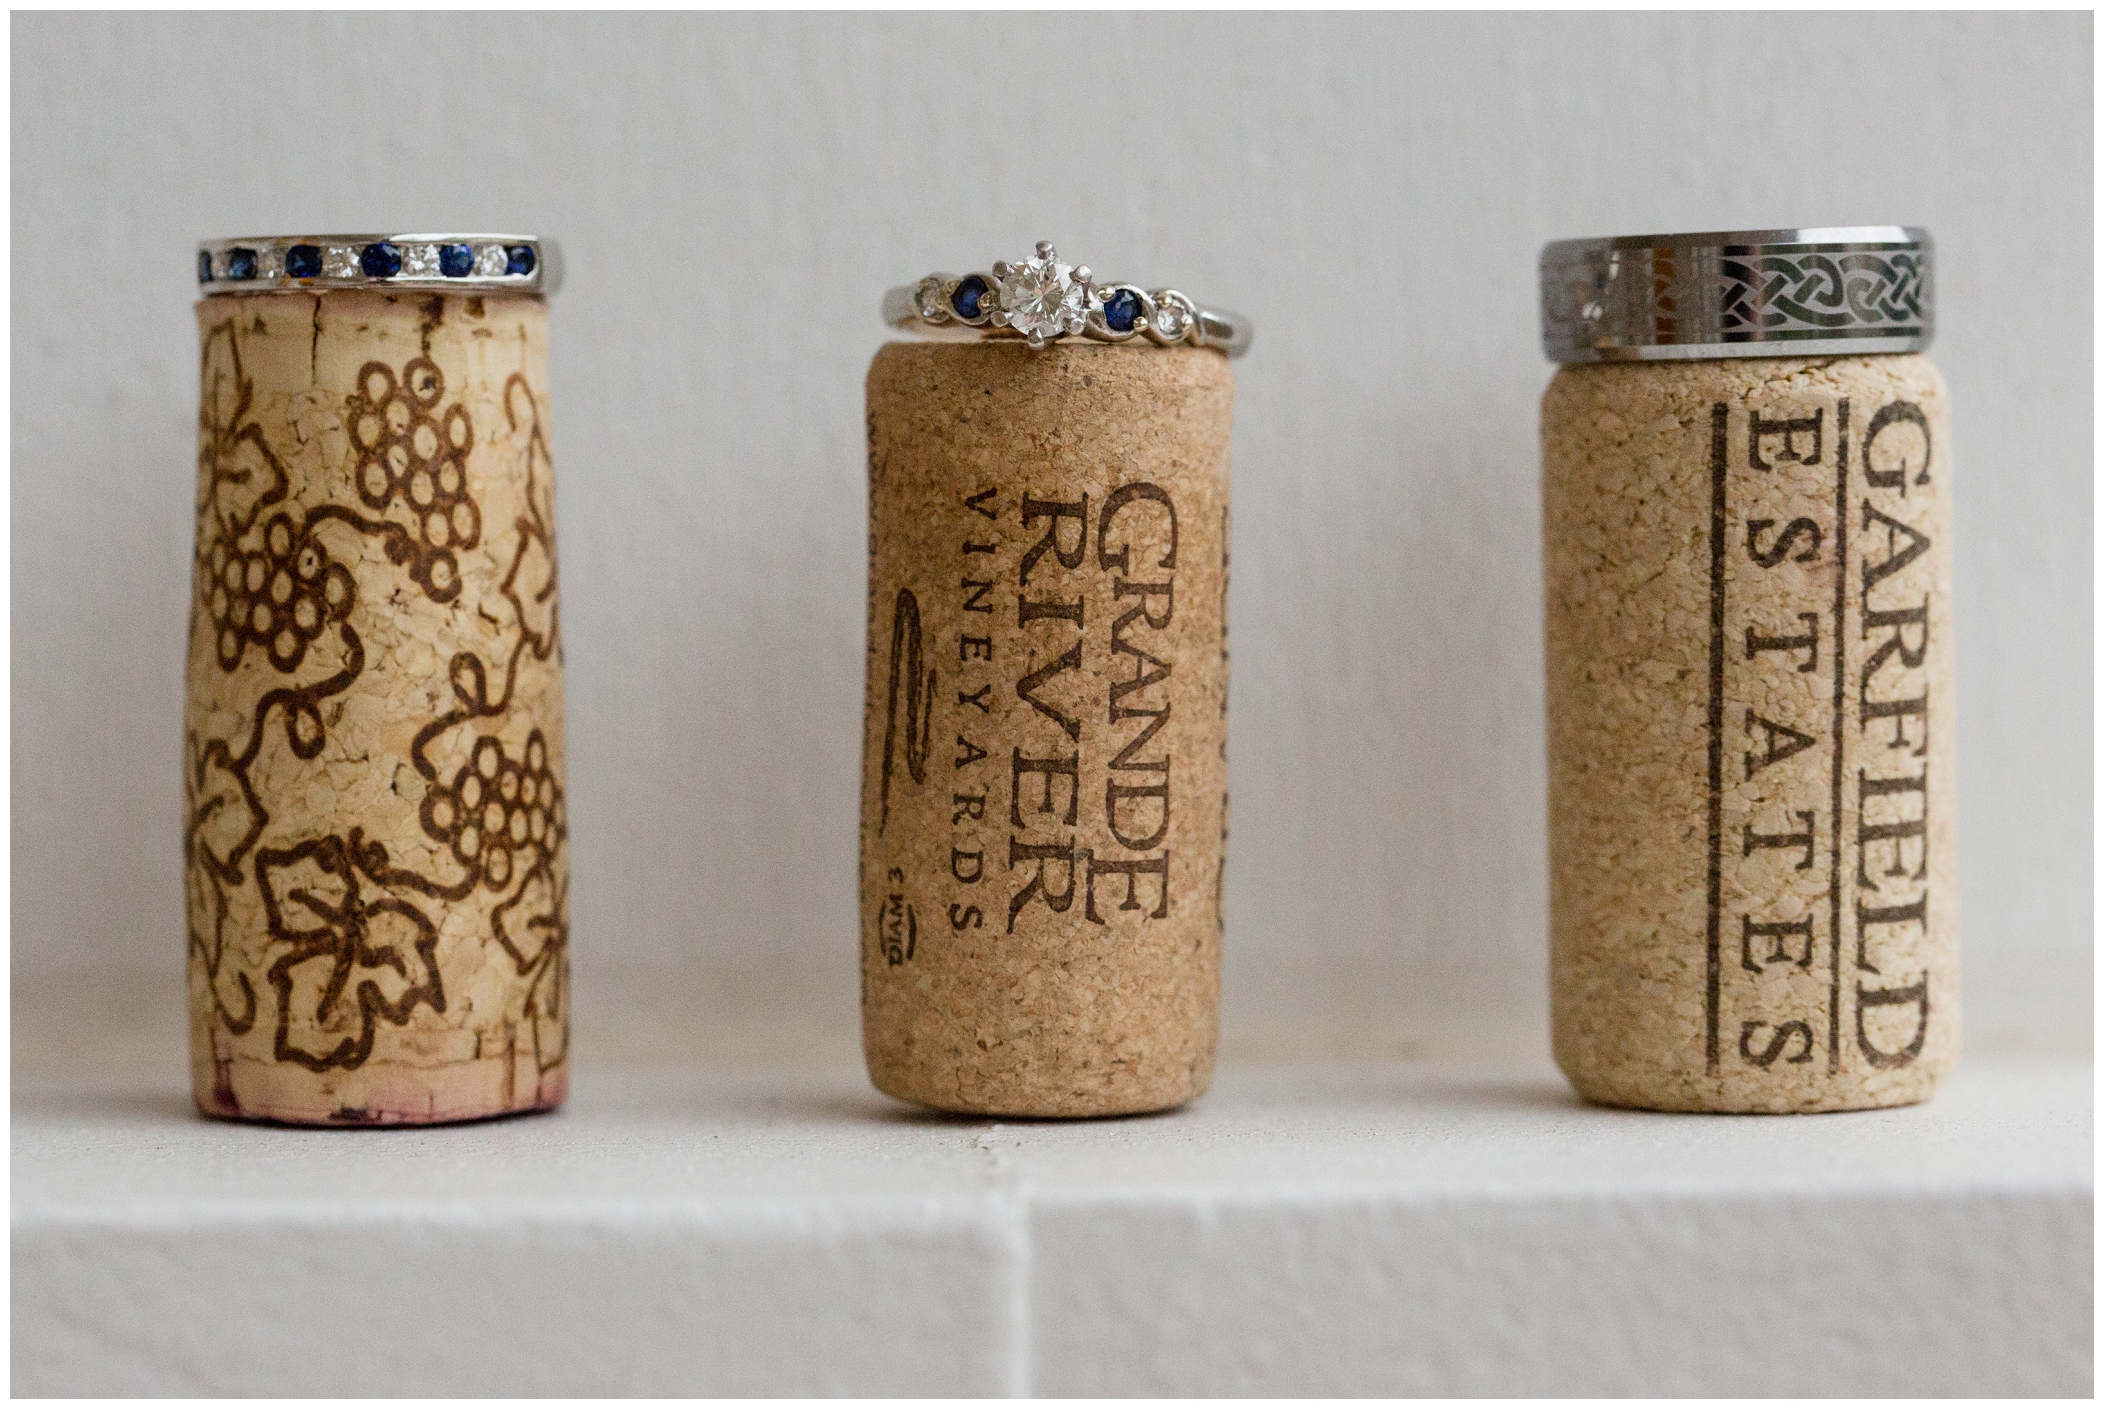 picture of wedding rings on wine corks